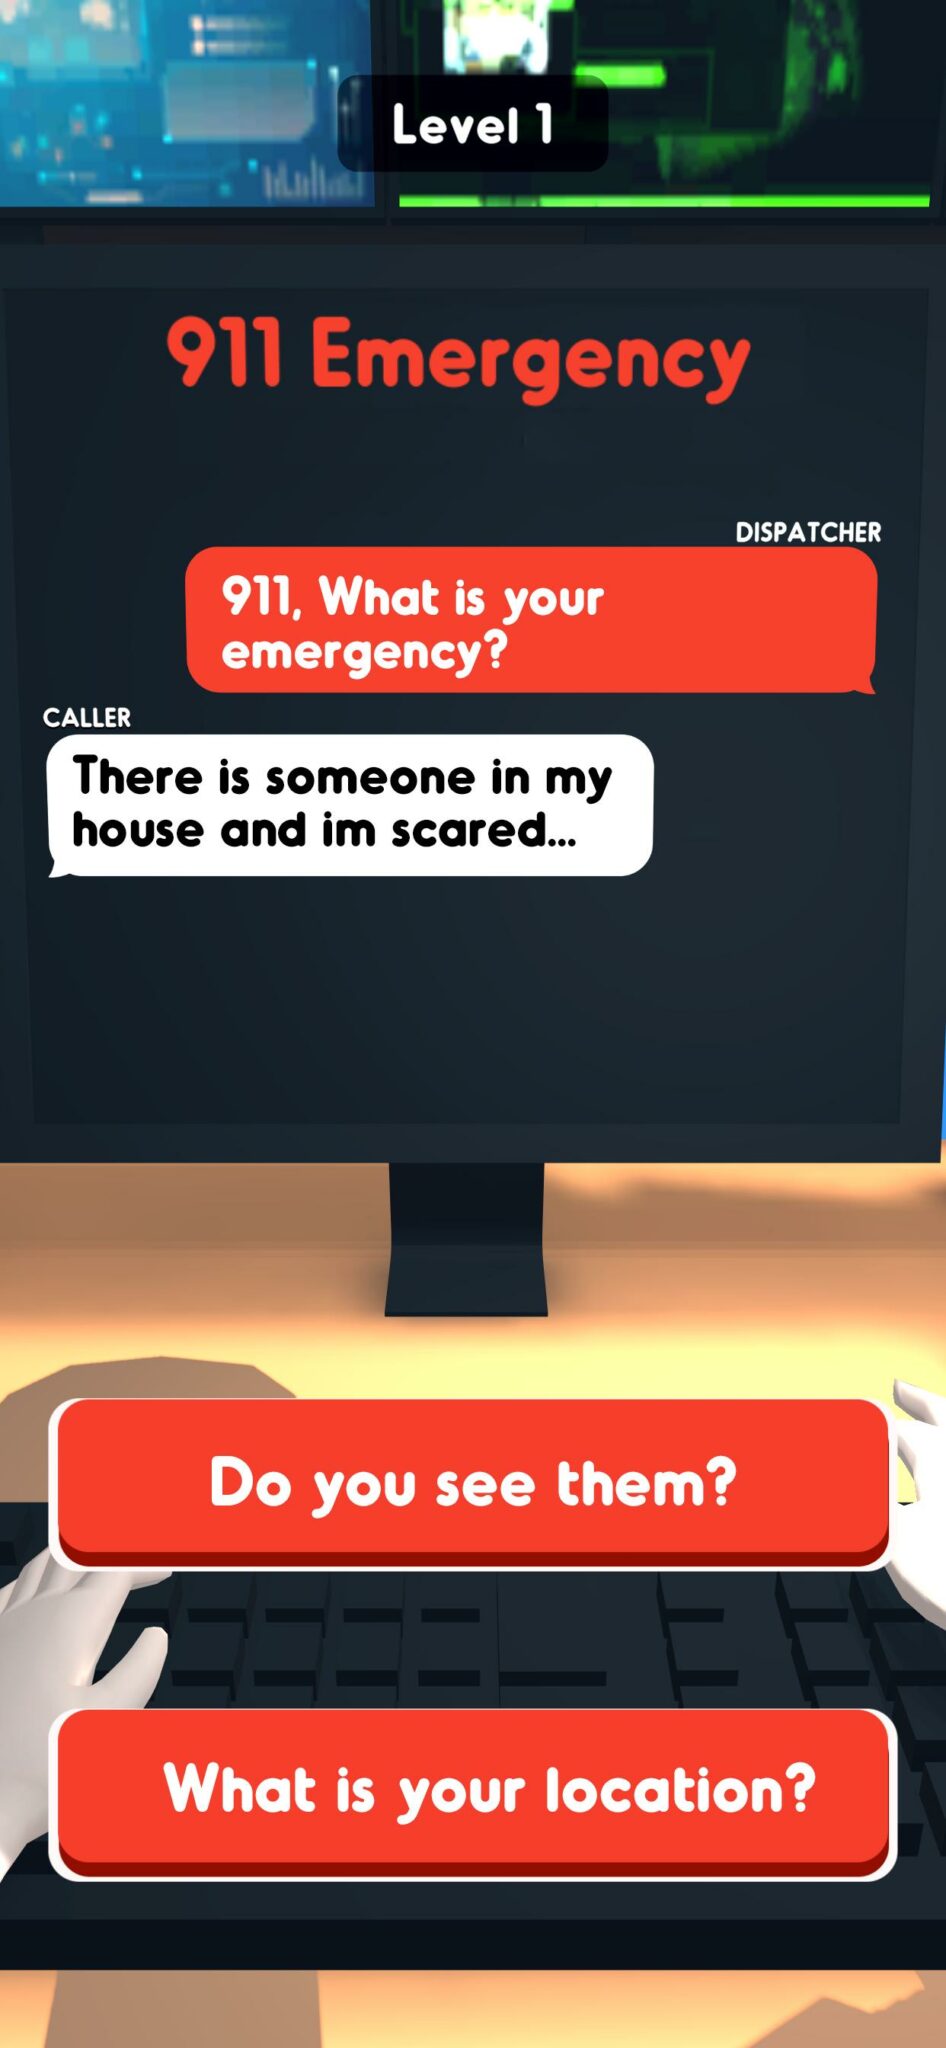 911 operator free download android